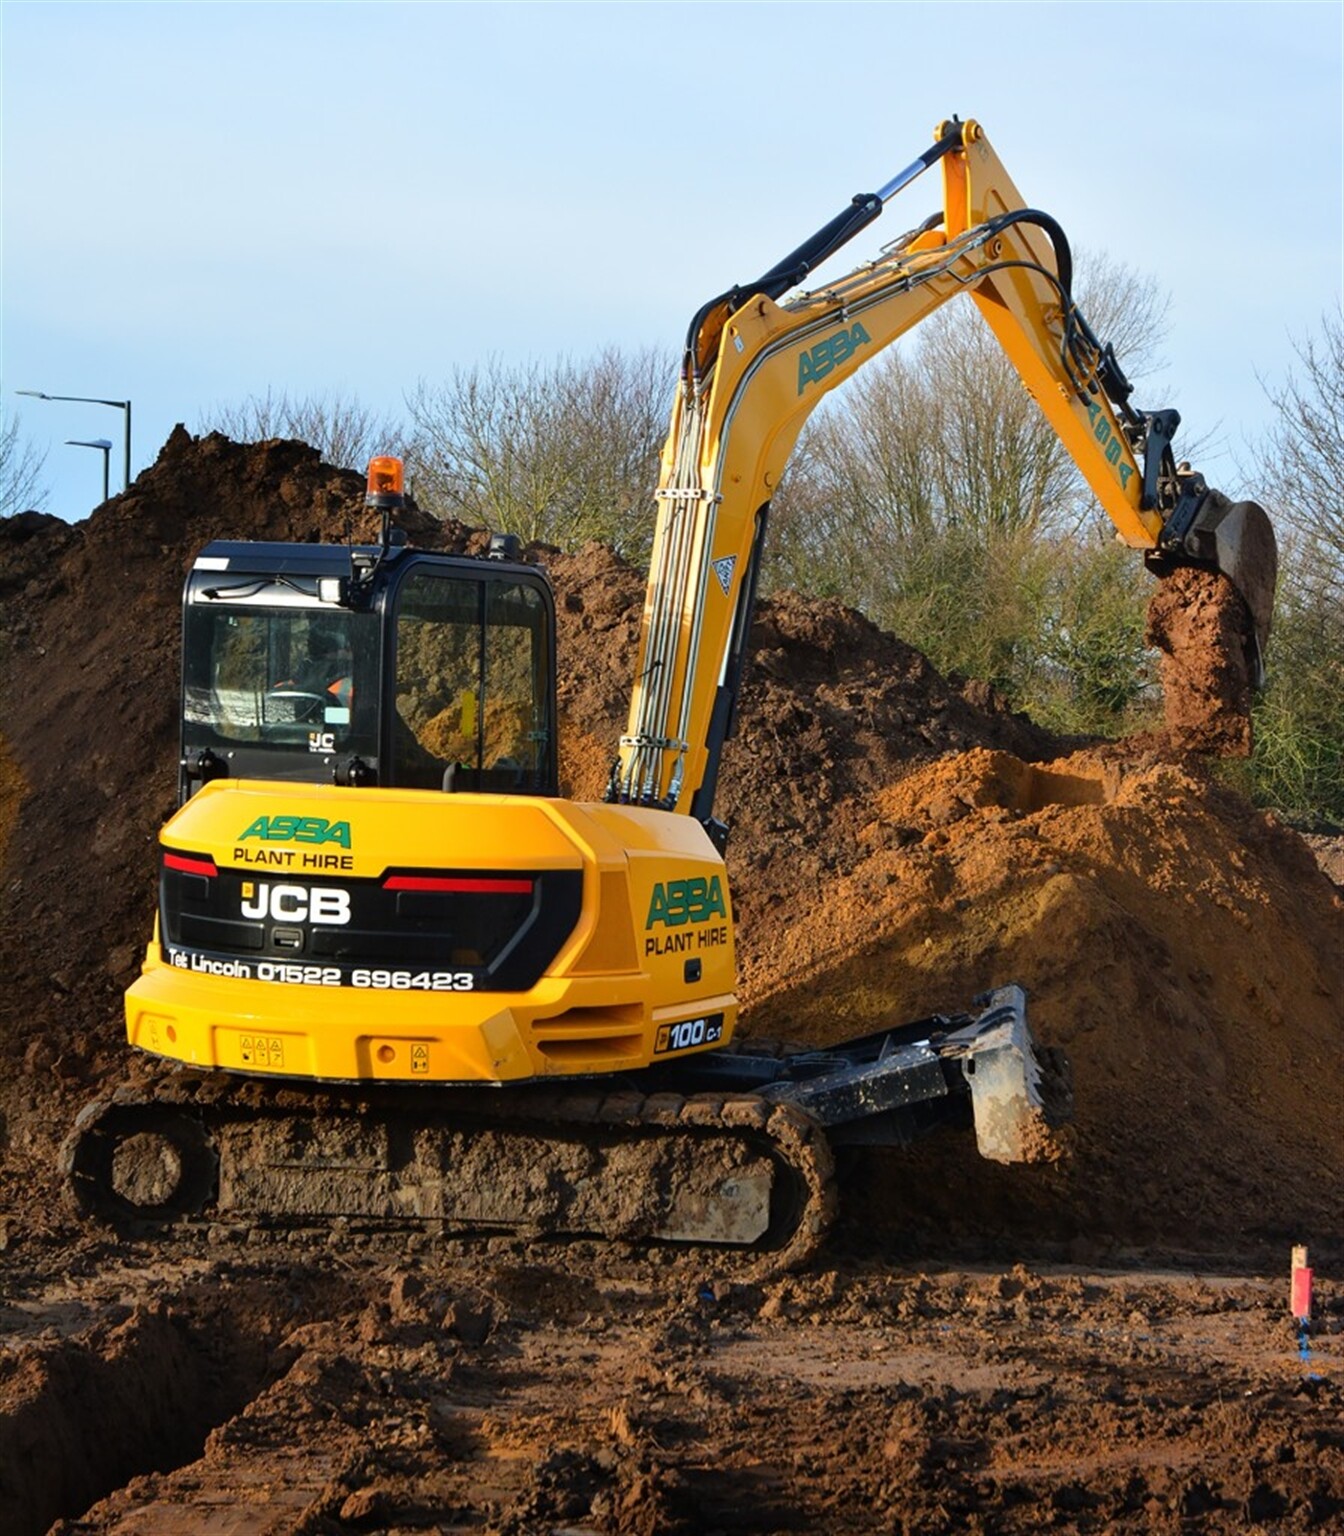 JCB's 100C-1 midi excavator is a number one hit for ABBA